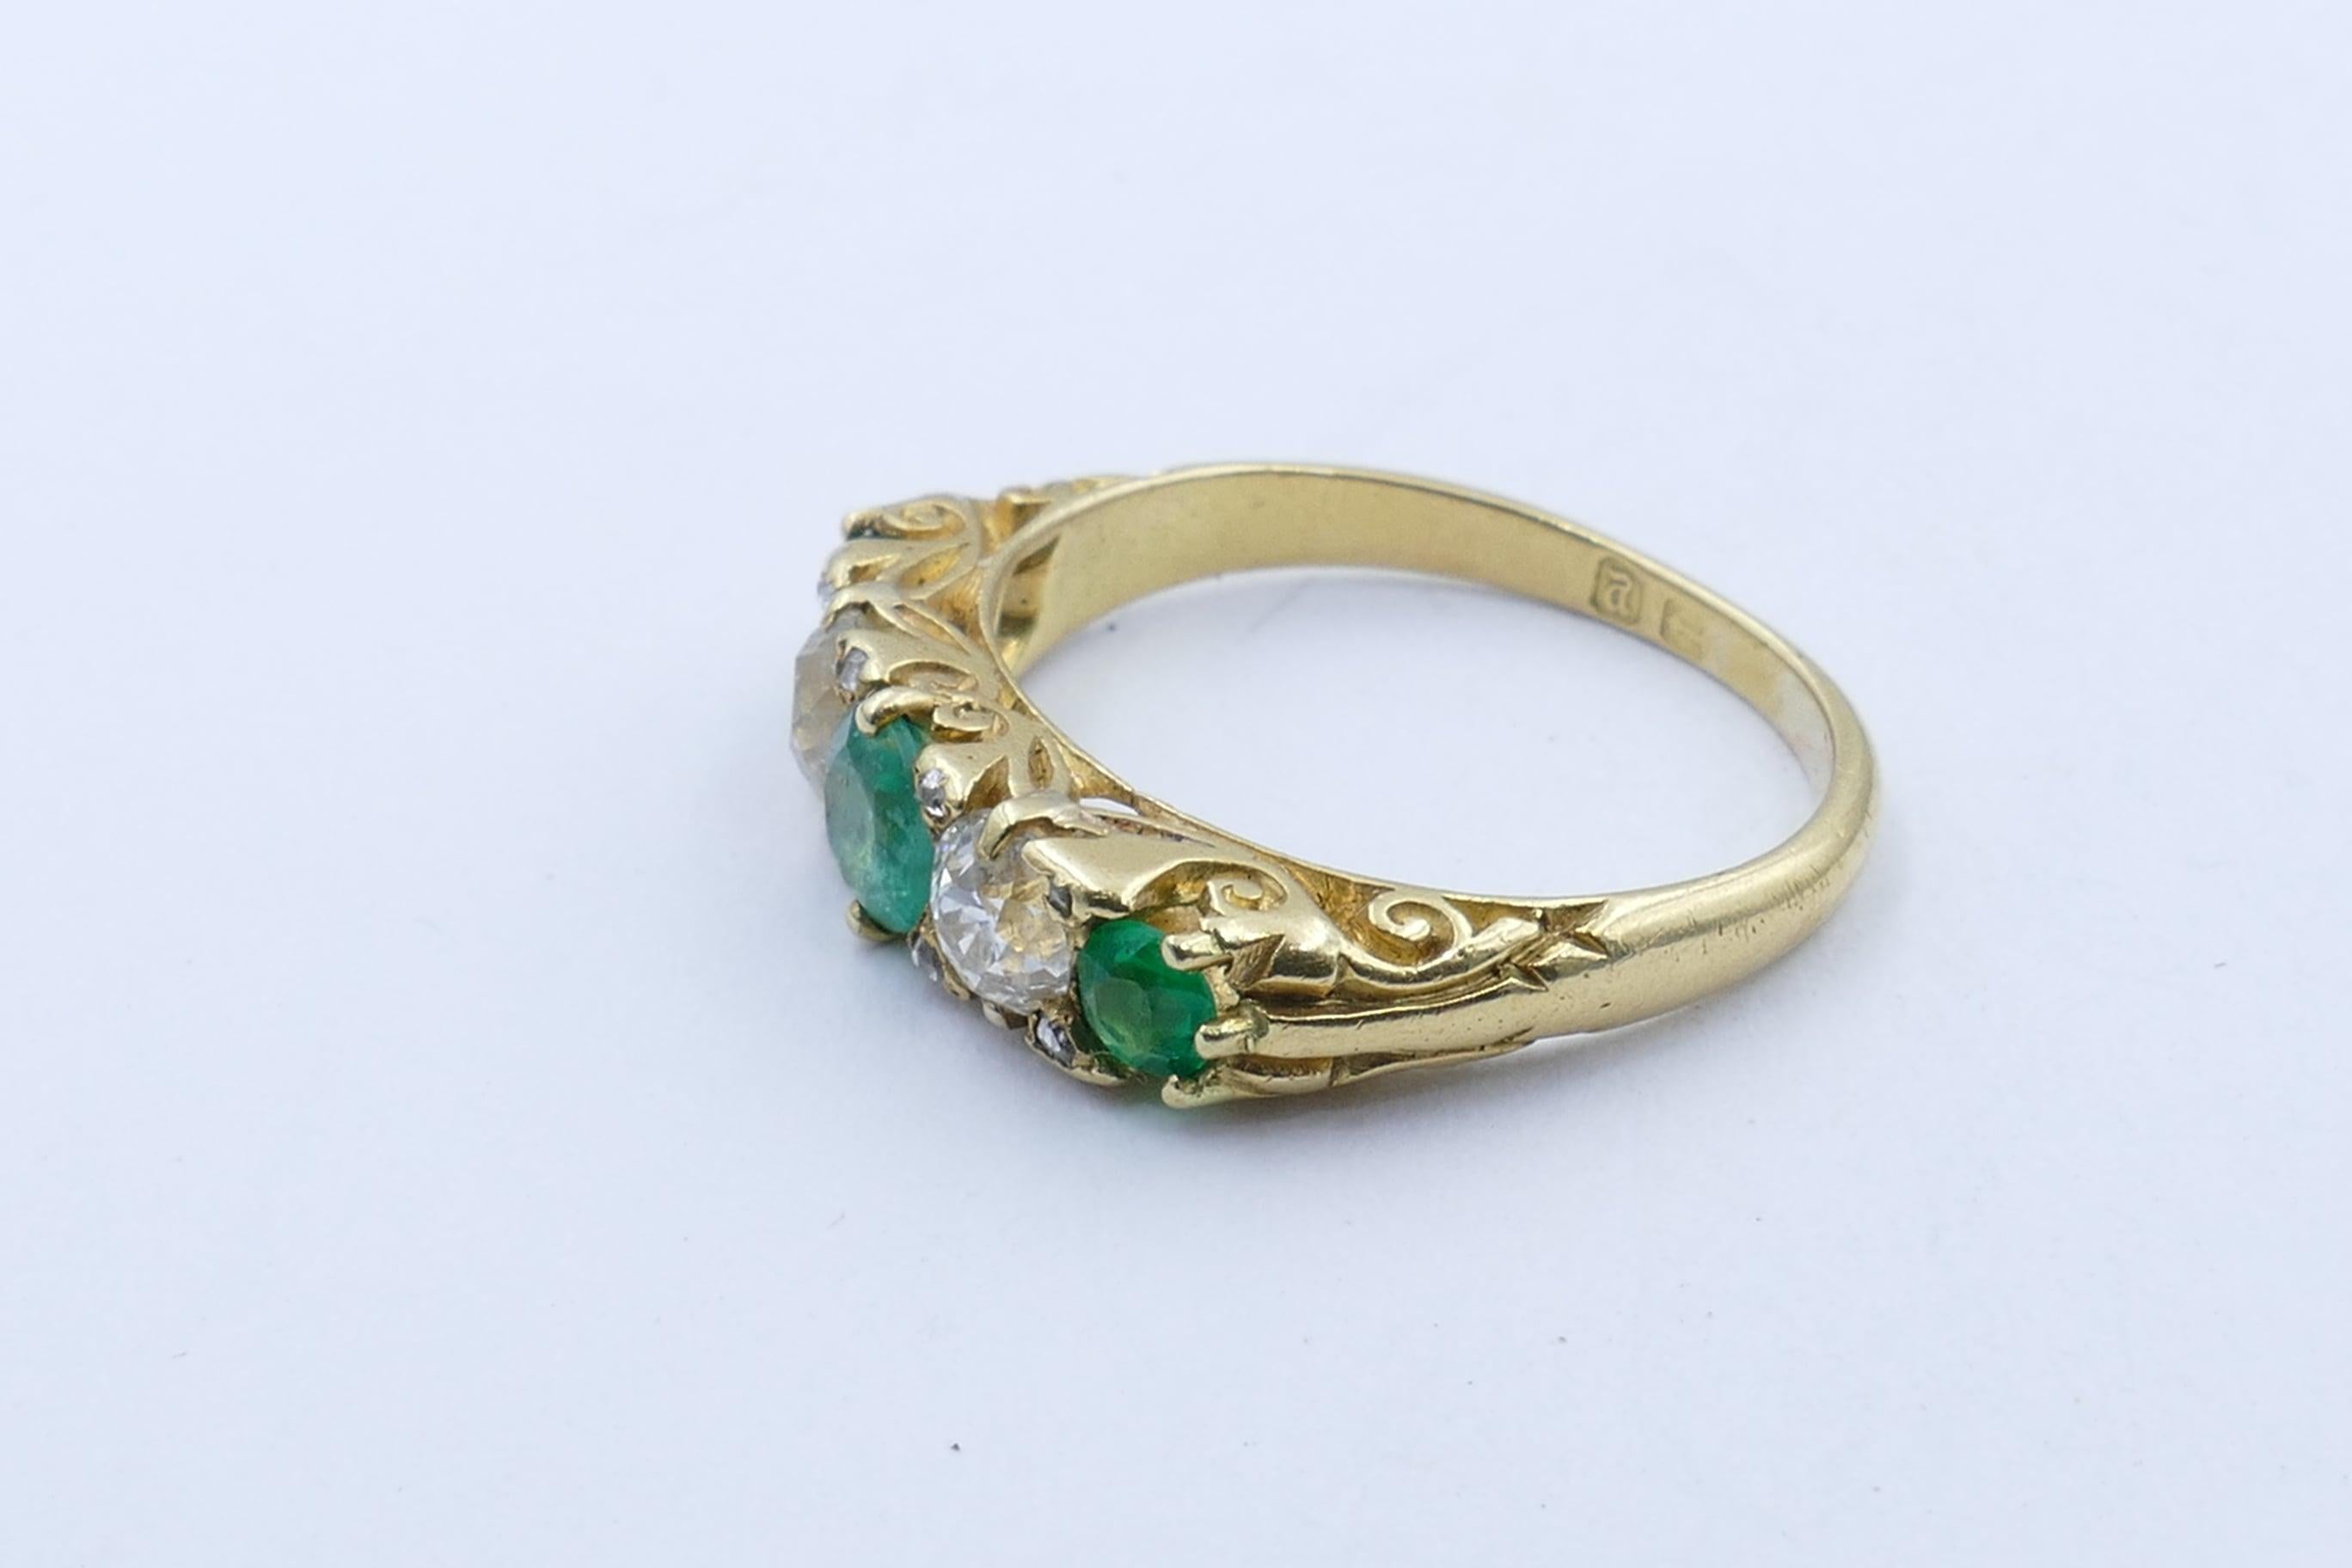 Hallmarked Birmingham 1898, this traditional Victorian Band Ring is in excellent condition for its age.
It features 3 Emeralds of bluish-green tone, only slightly included, & is flanked by 2 Old European cut Diamonds, totalling over half a carat